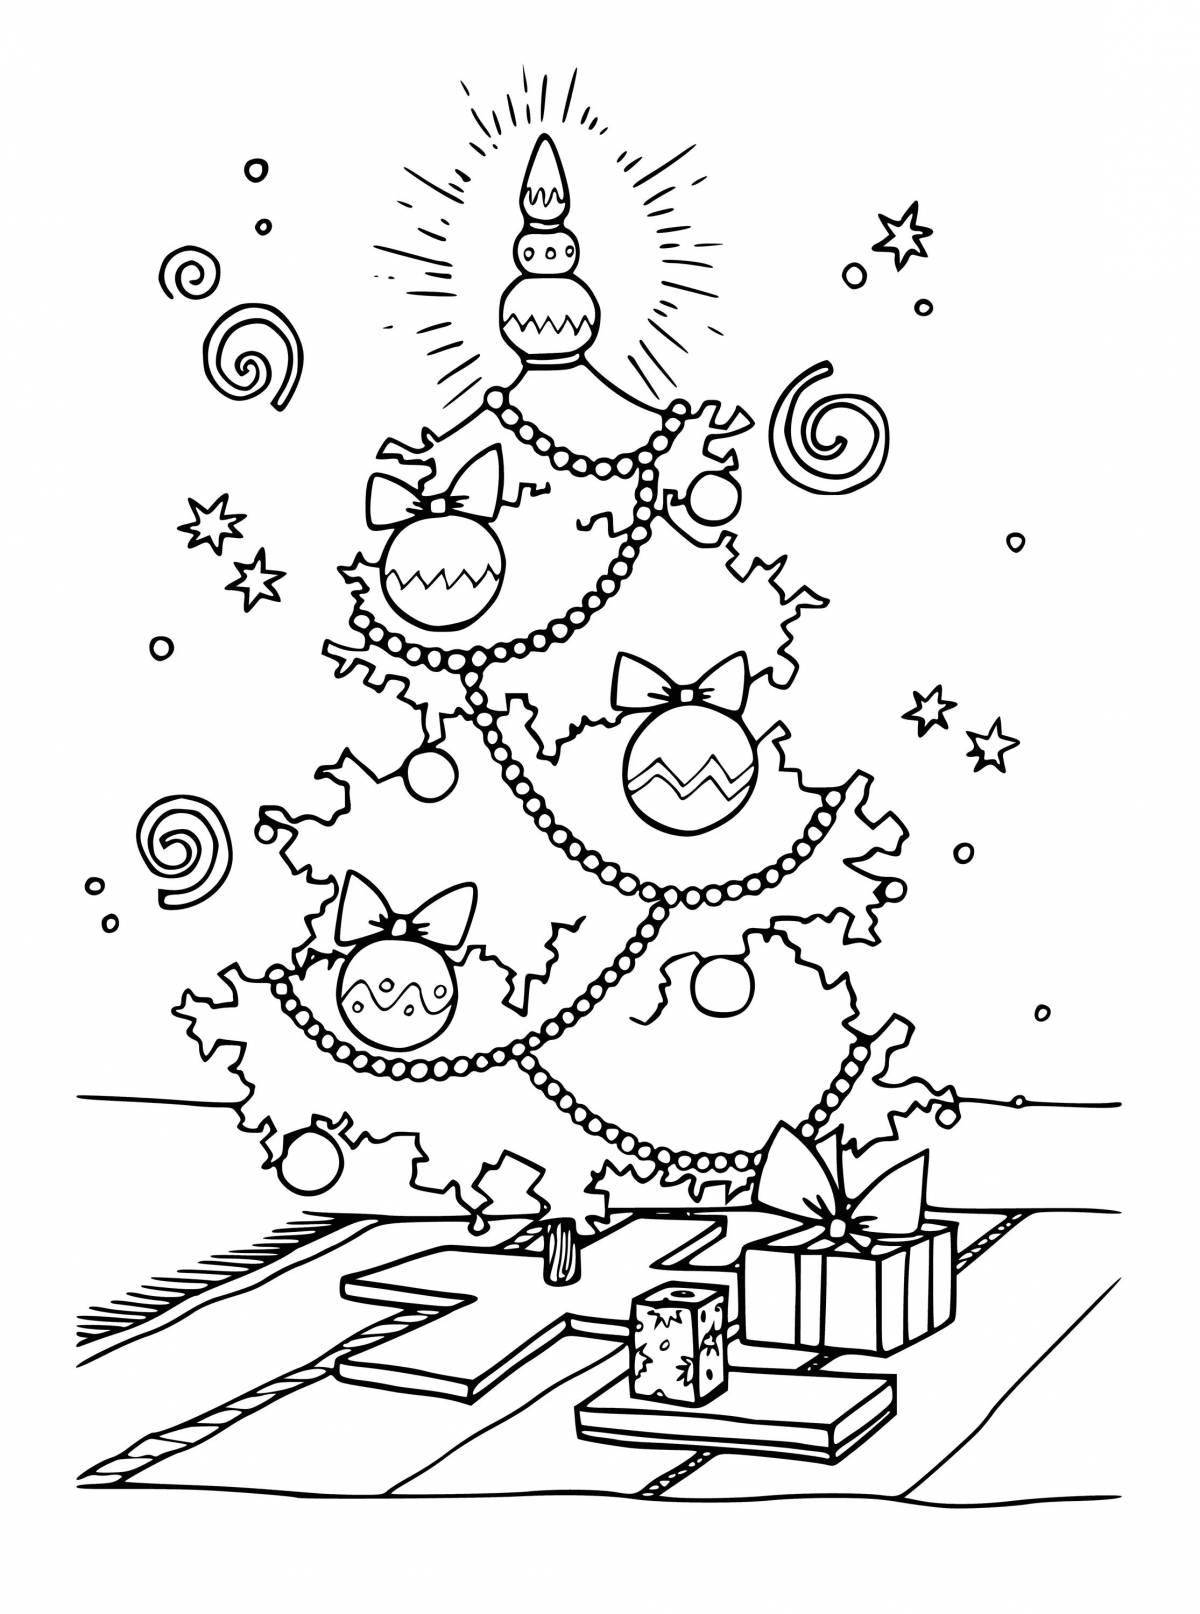 A fascinating Christmas coloring book